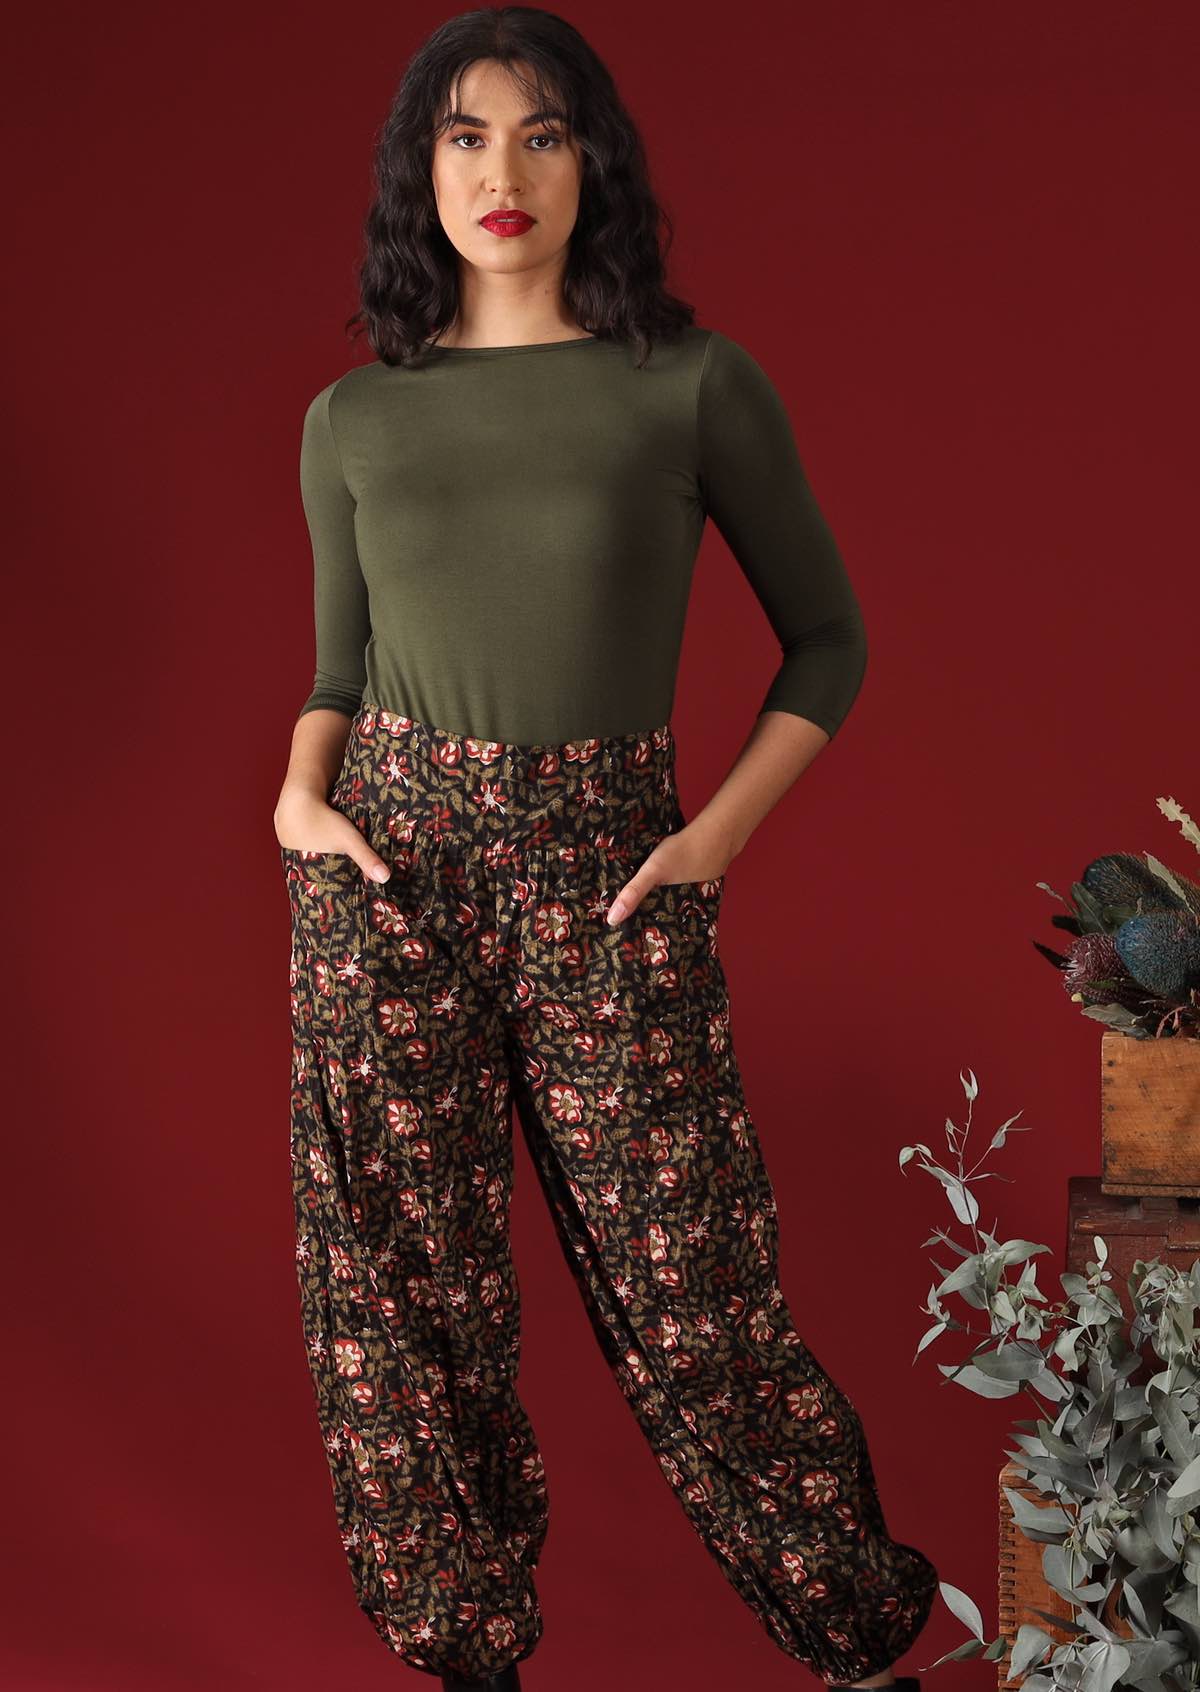 Woman wears pants with a red and olive pattern on a black base